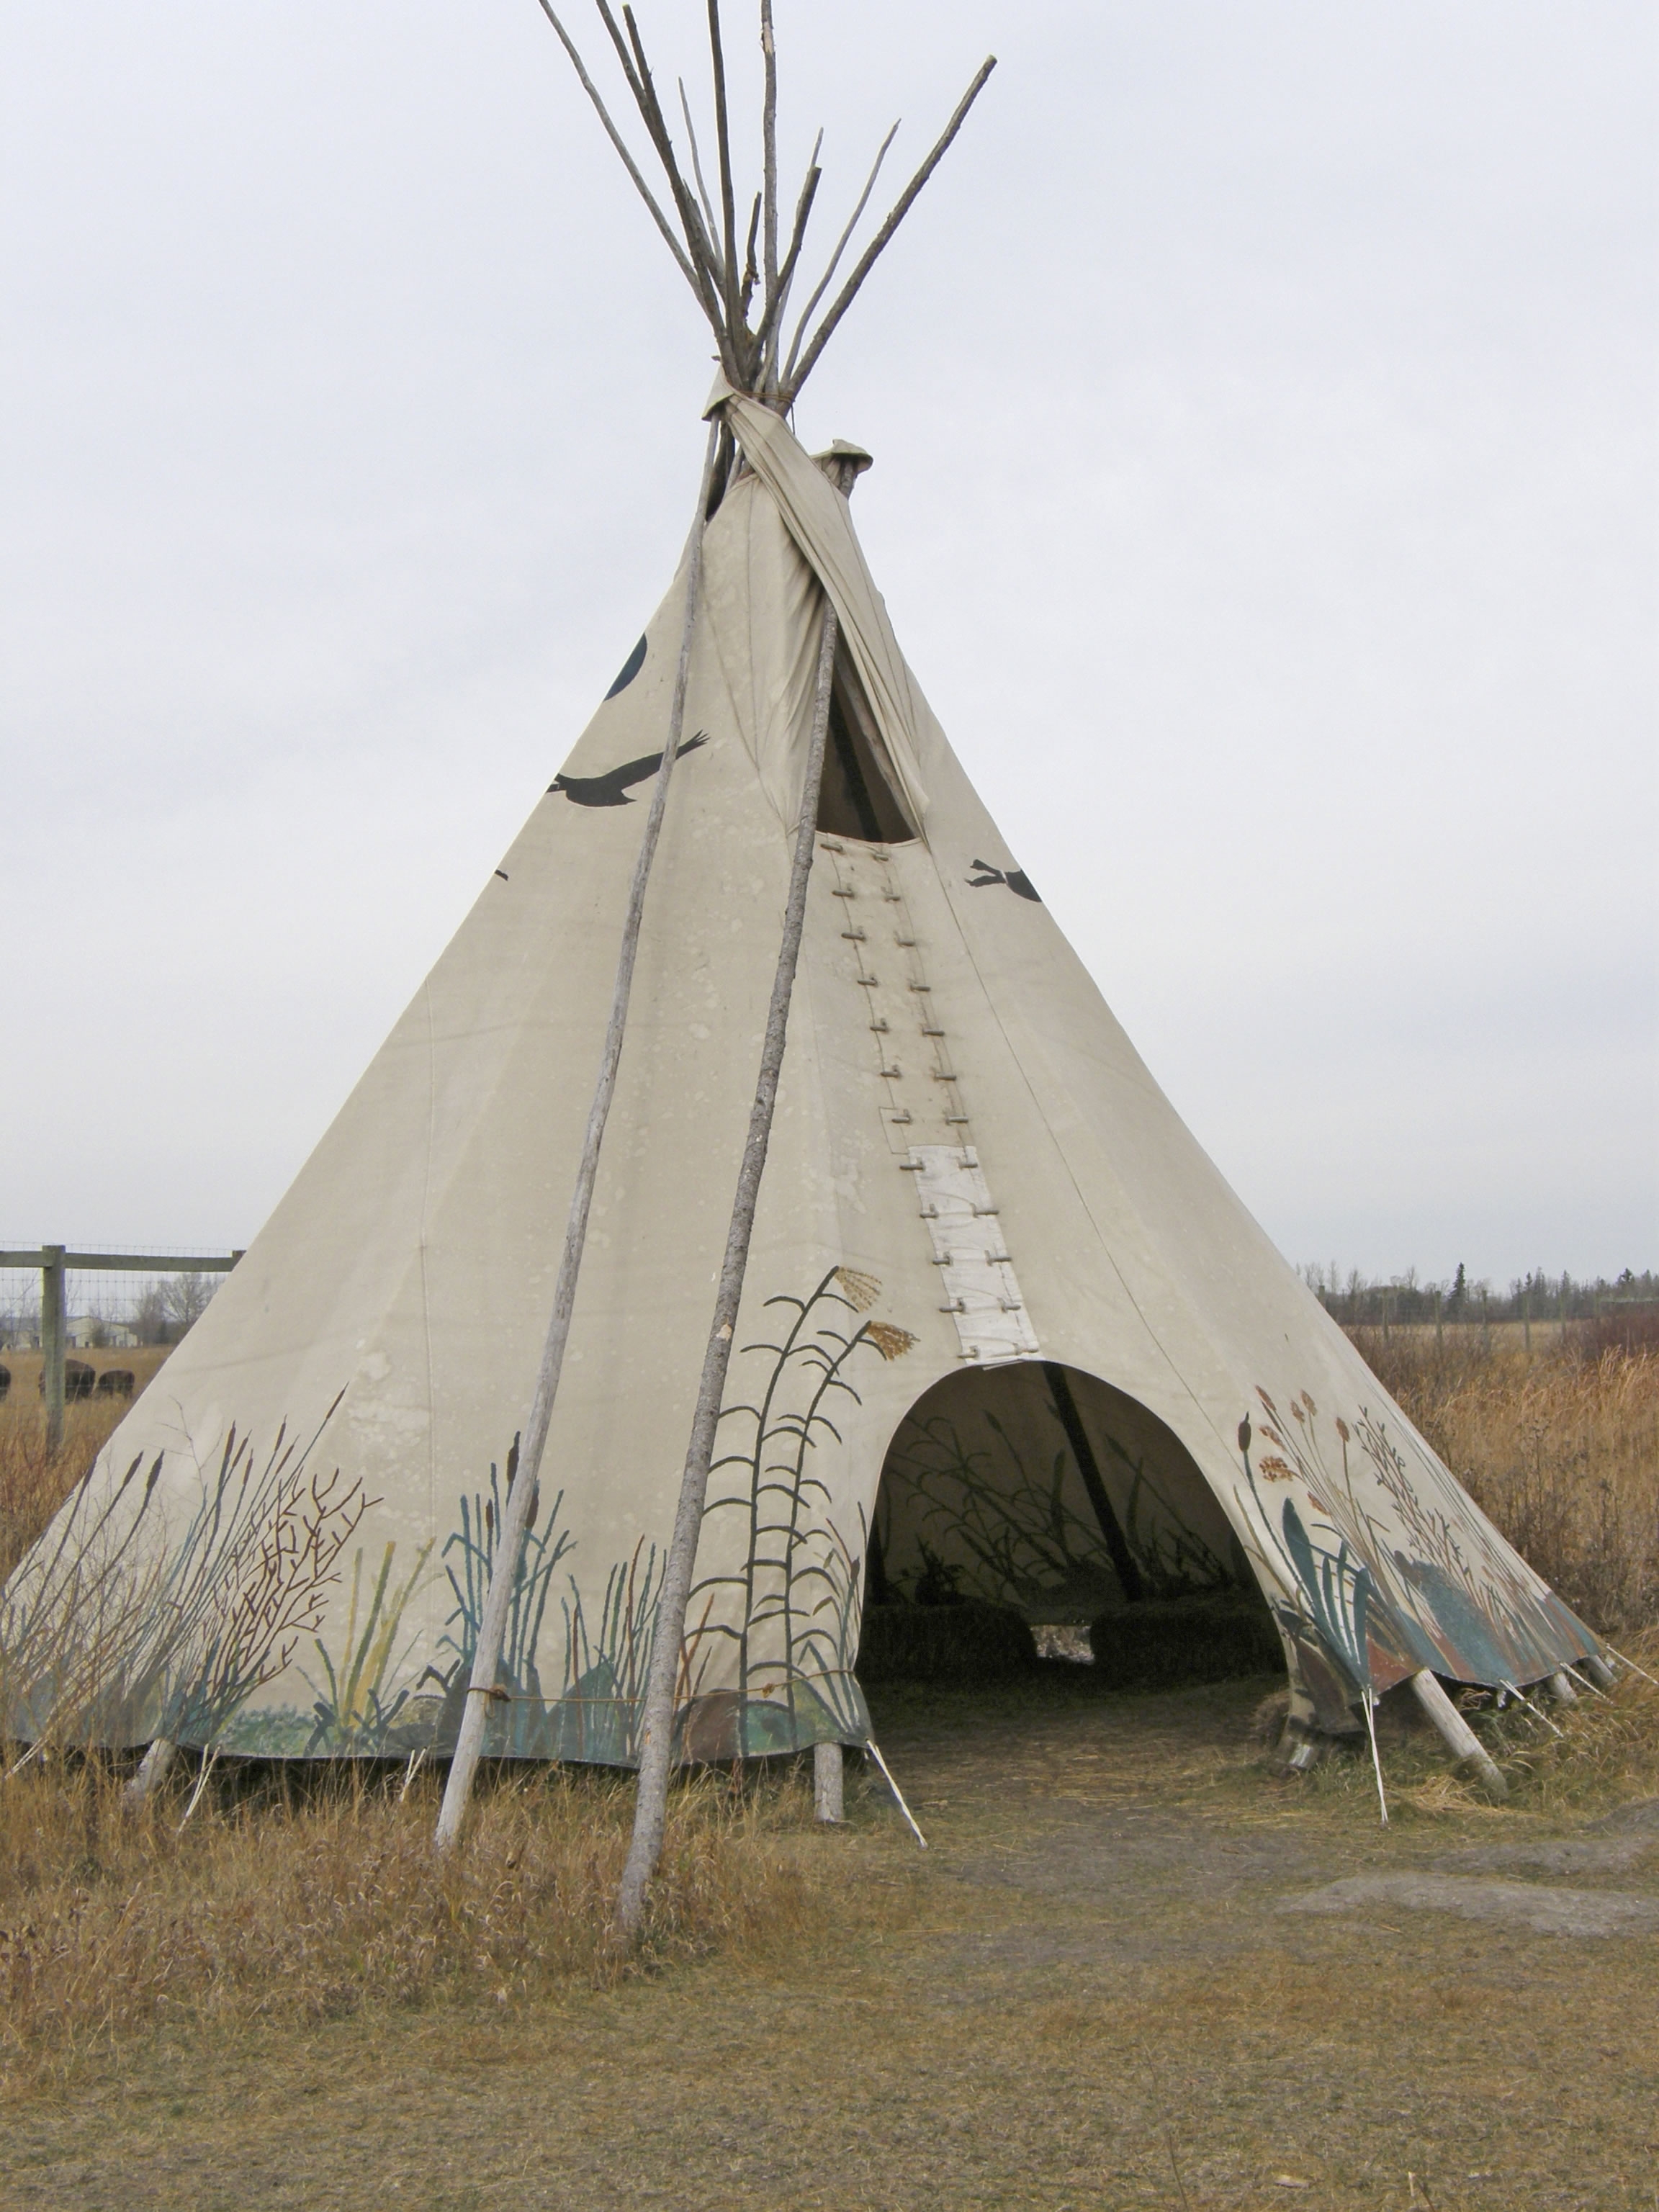 Teepee, Tipi Indian Tent - Active Writing